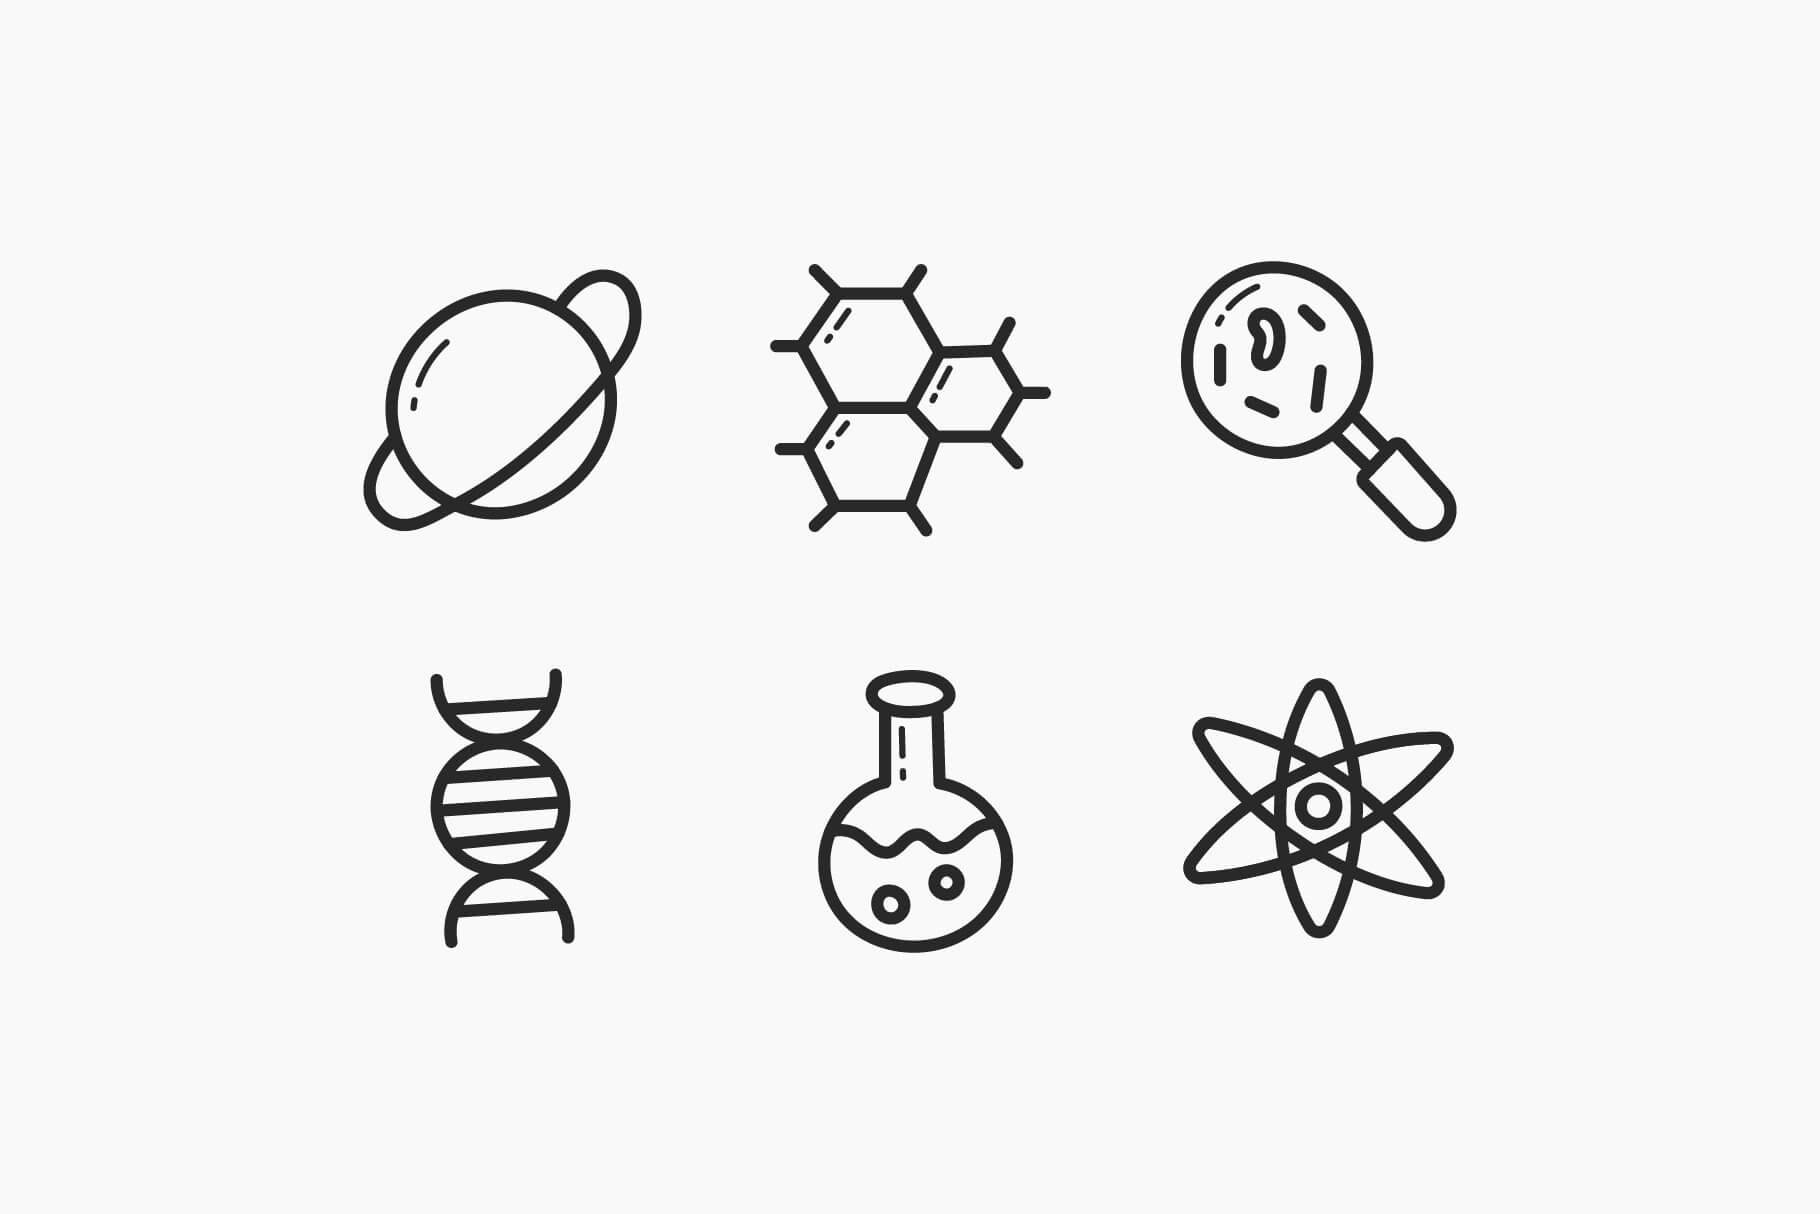 6 black and white simple icons belonging to the scientific field.